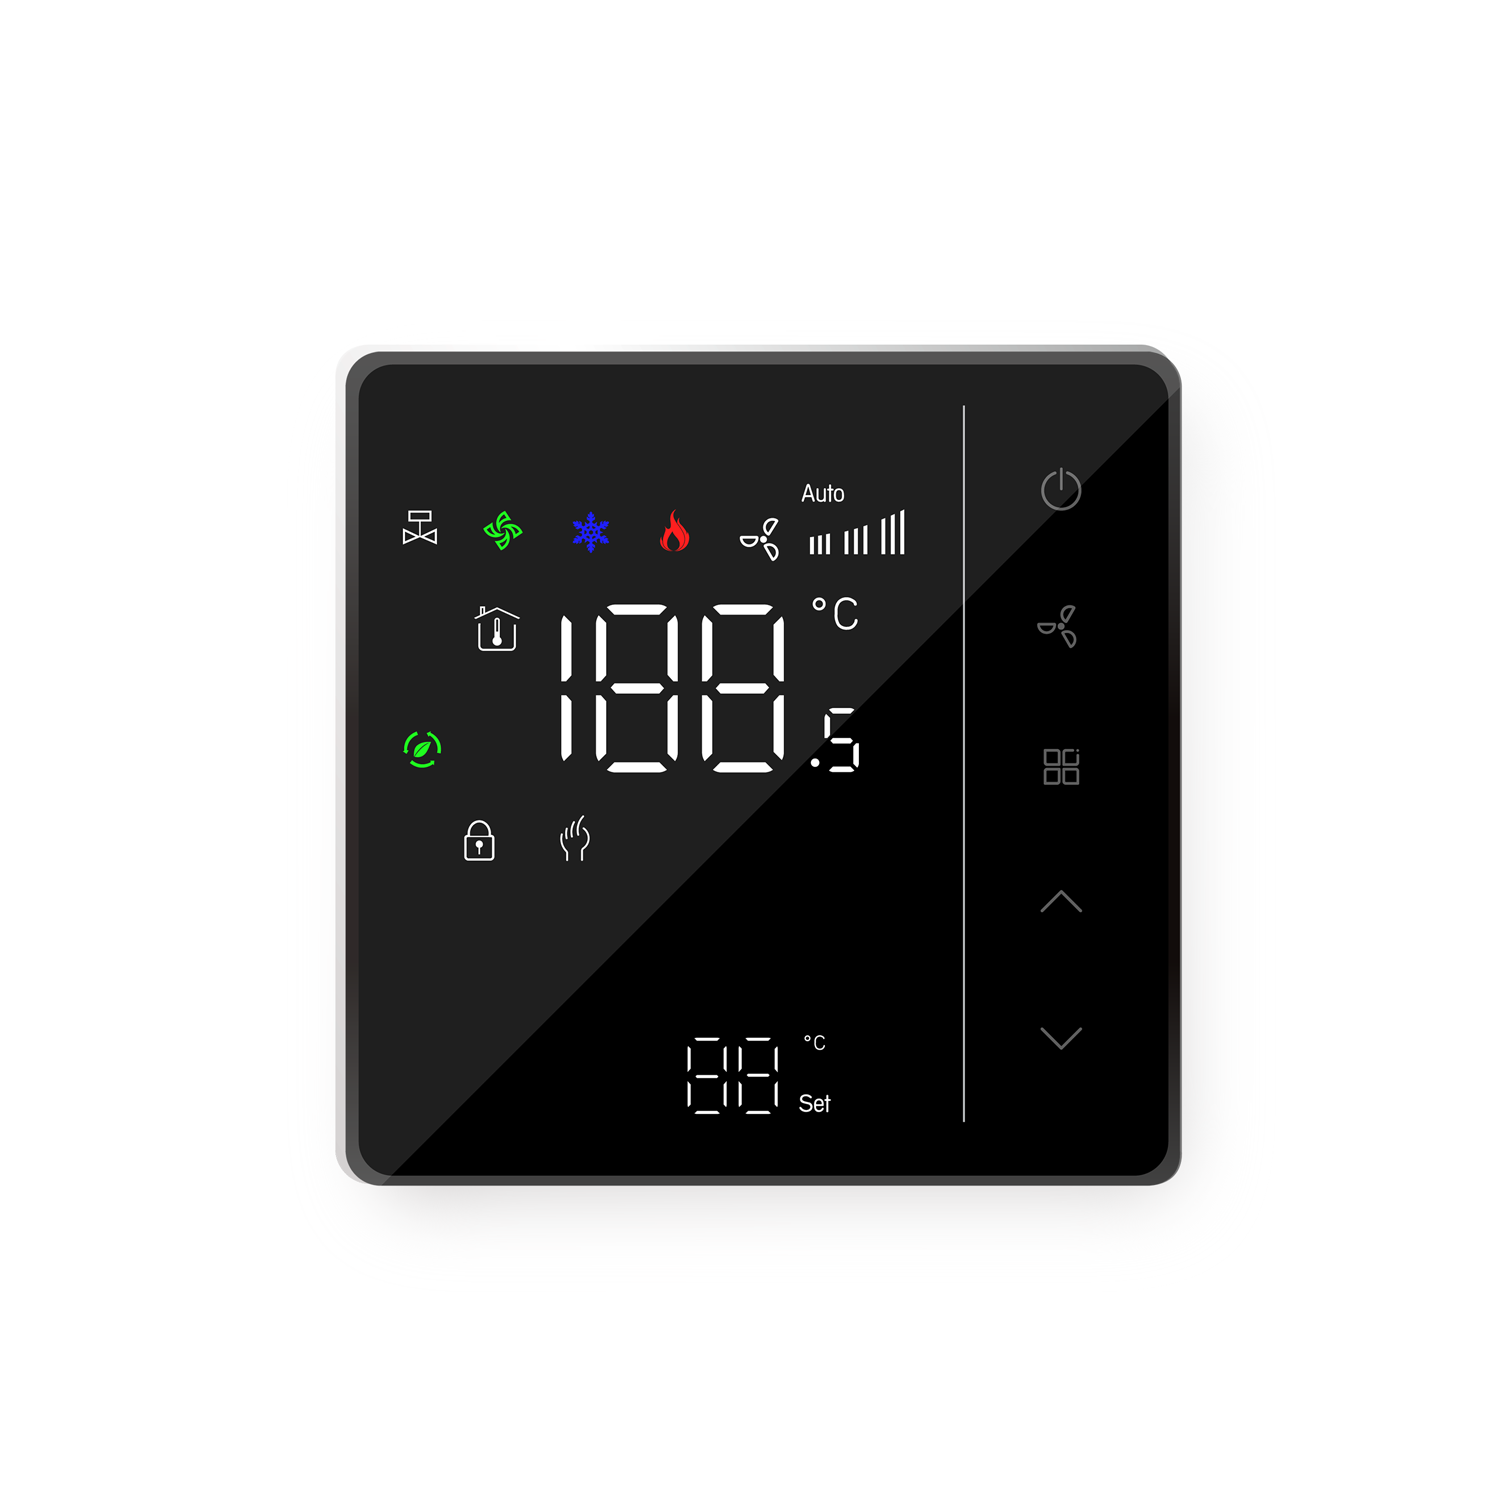 BAC-007 Series Room Smart Thermostat